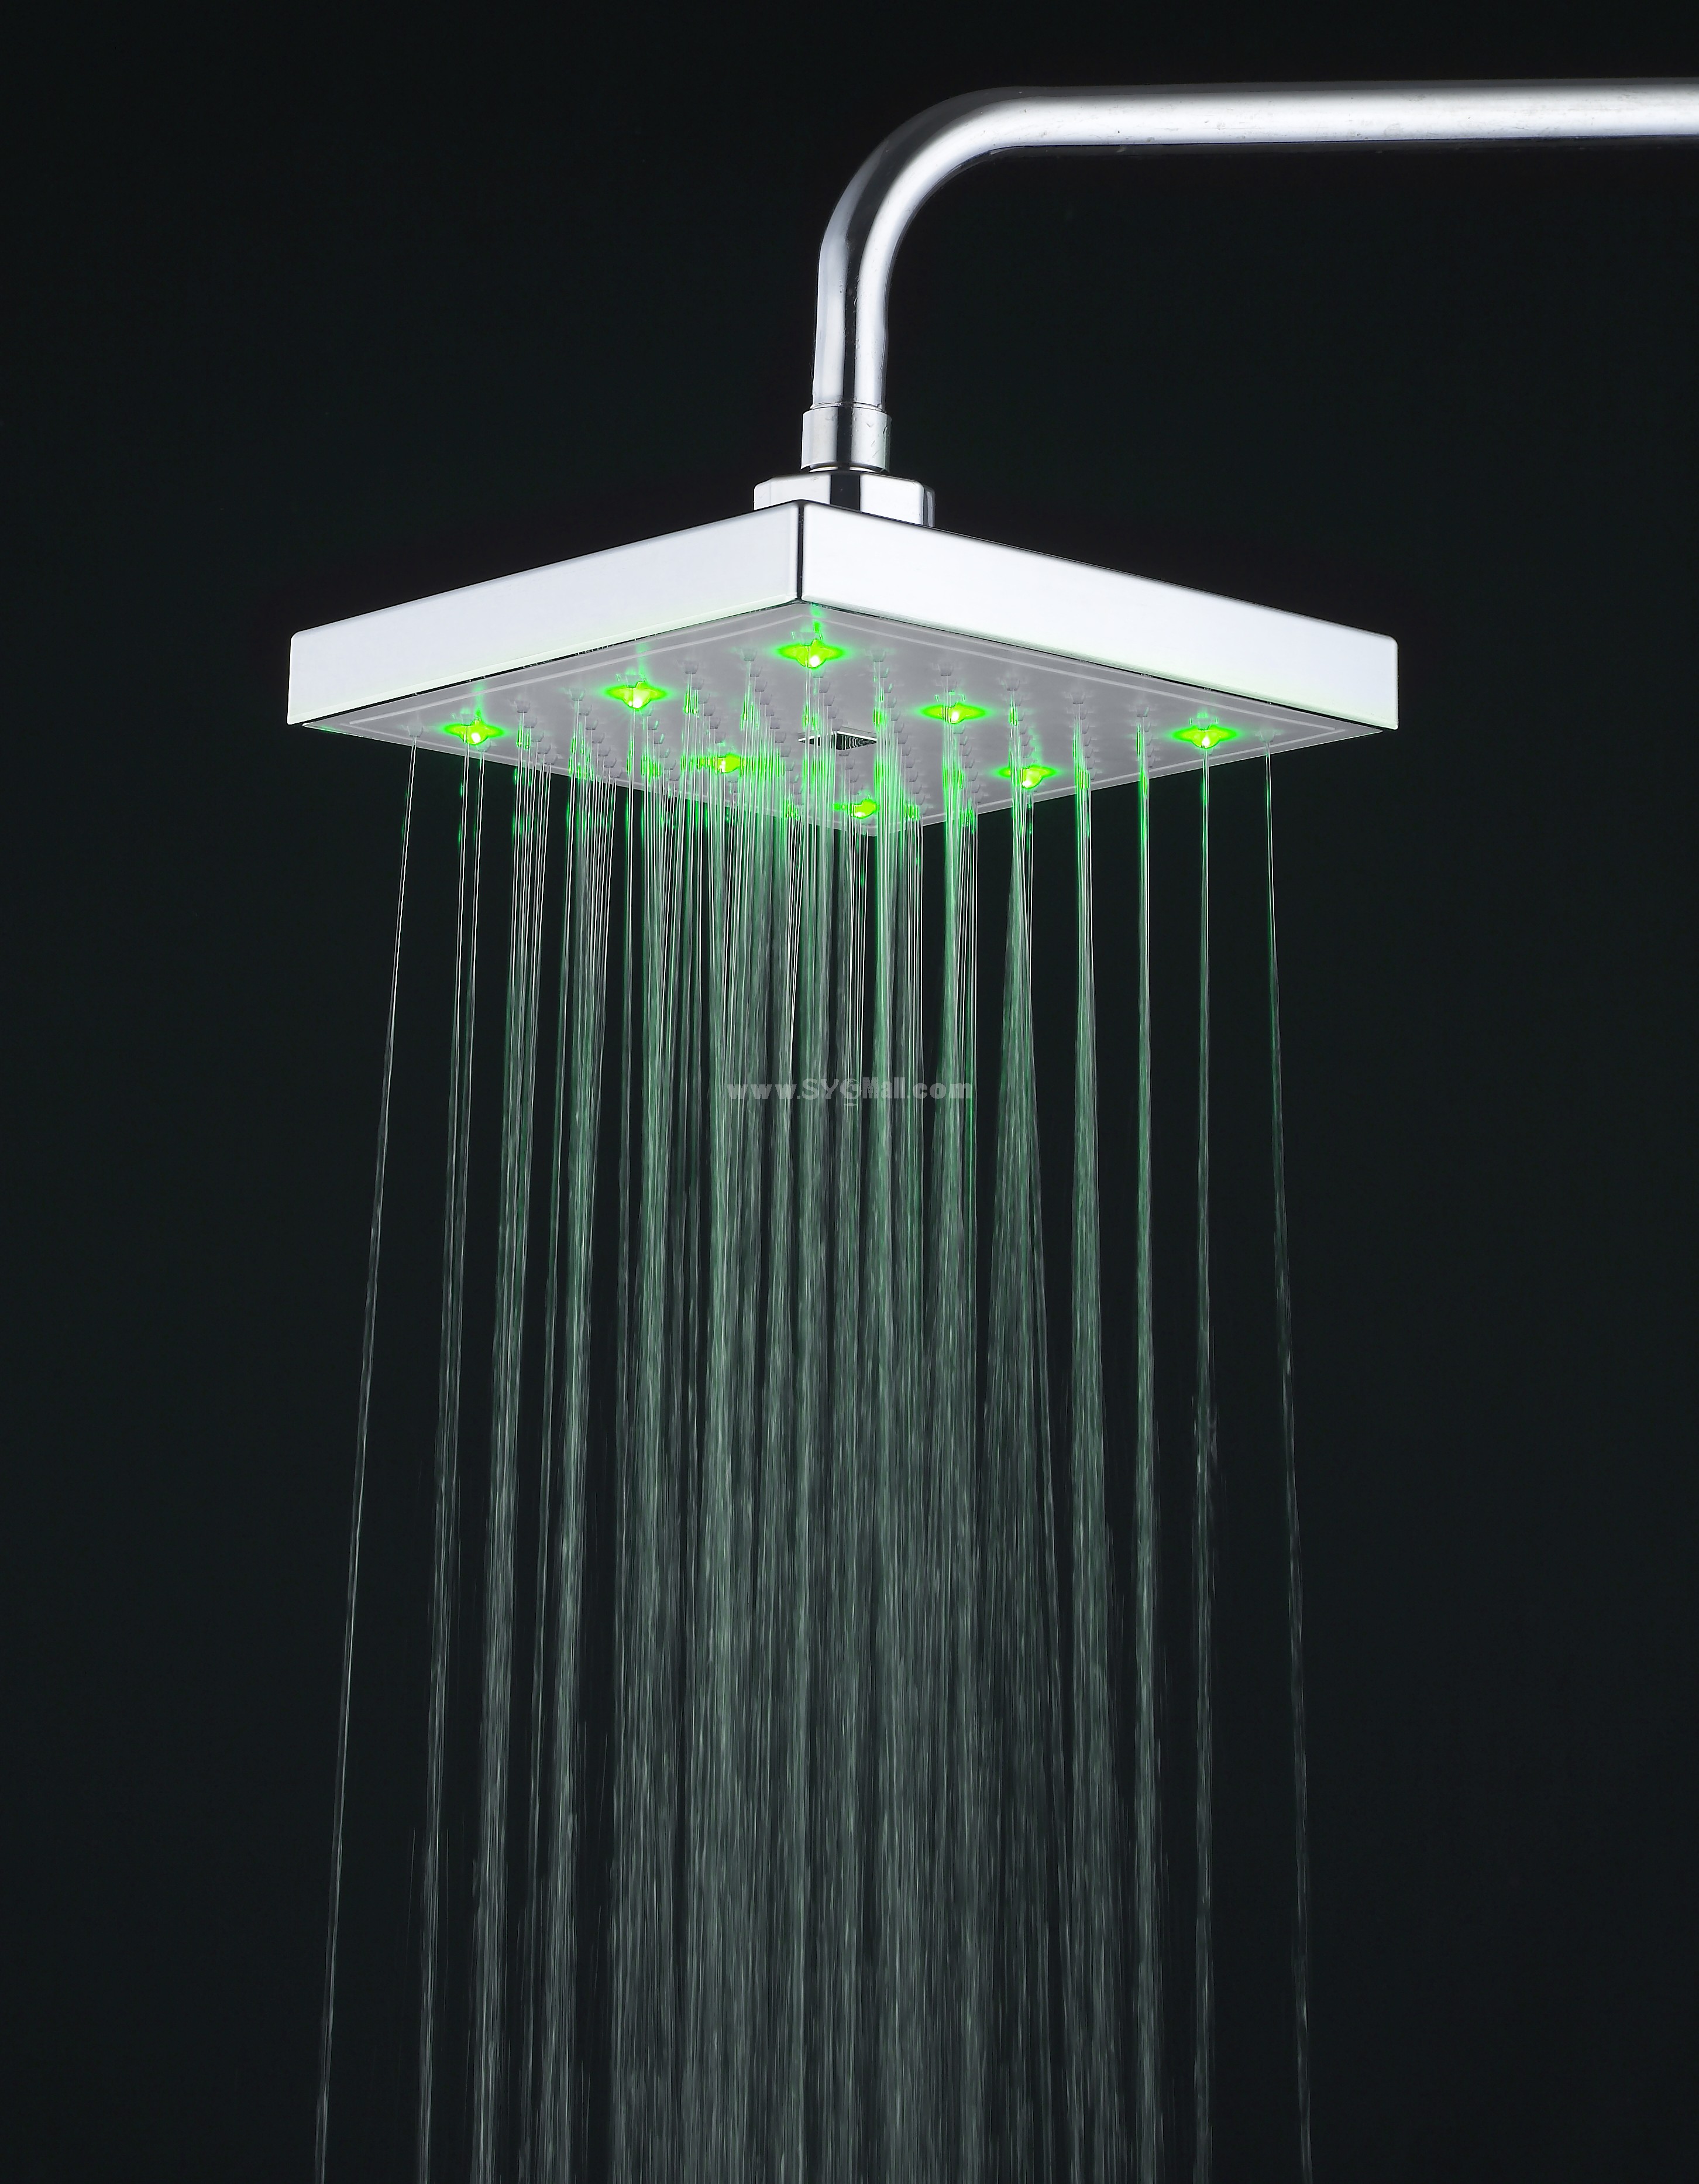 Romantic Bright Color LED Lights Top Spray Shower Bathroom Showerhead HY-3001W (Temperature Control Changing Color)